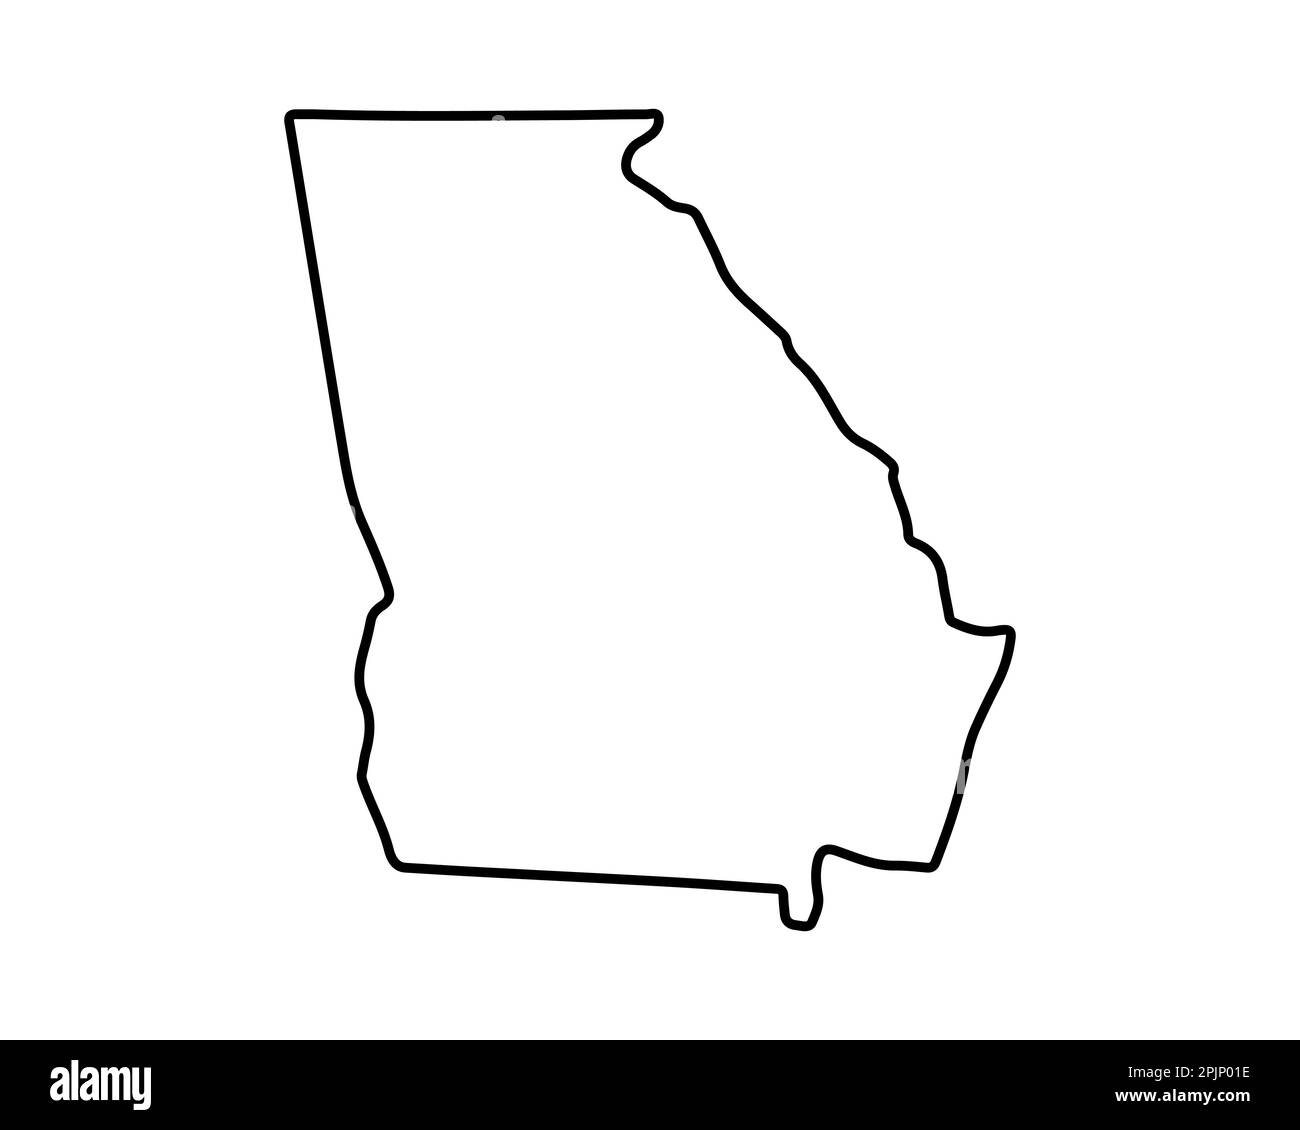 Georgia state map. US state map. Georgia outline symbol. Vector illustration Stock Vector